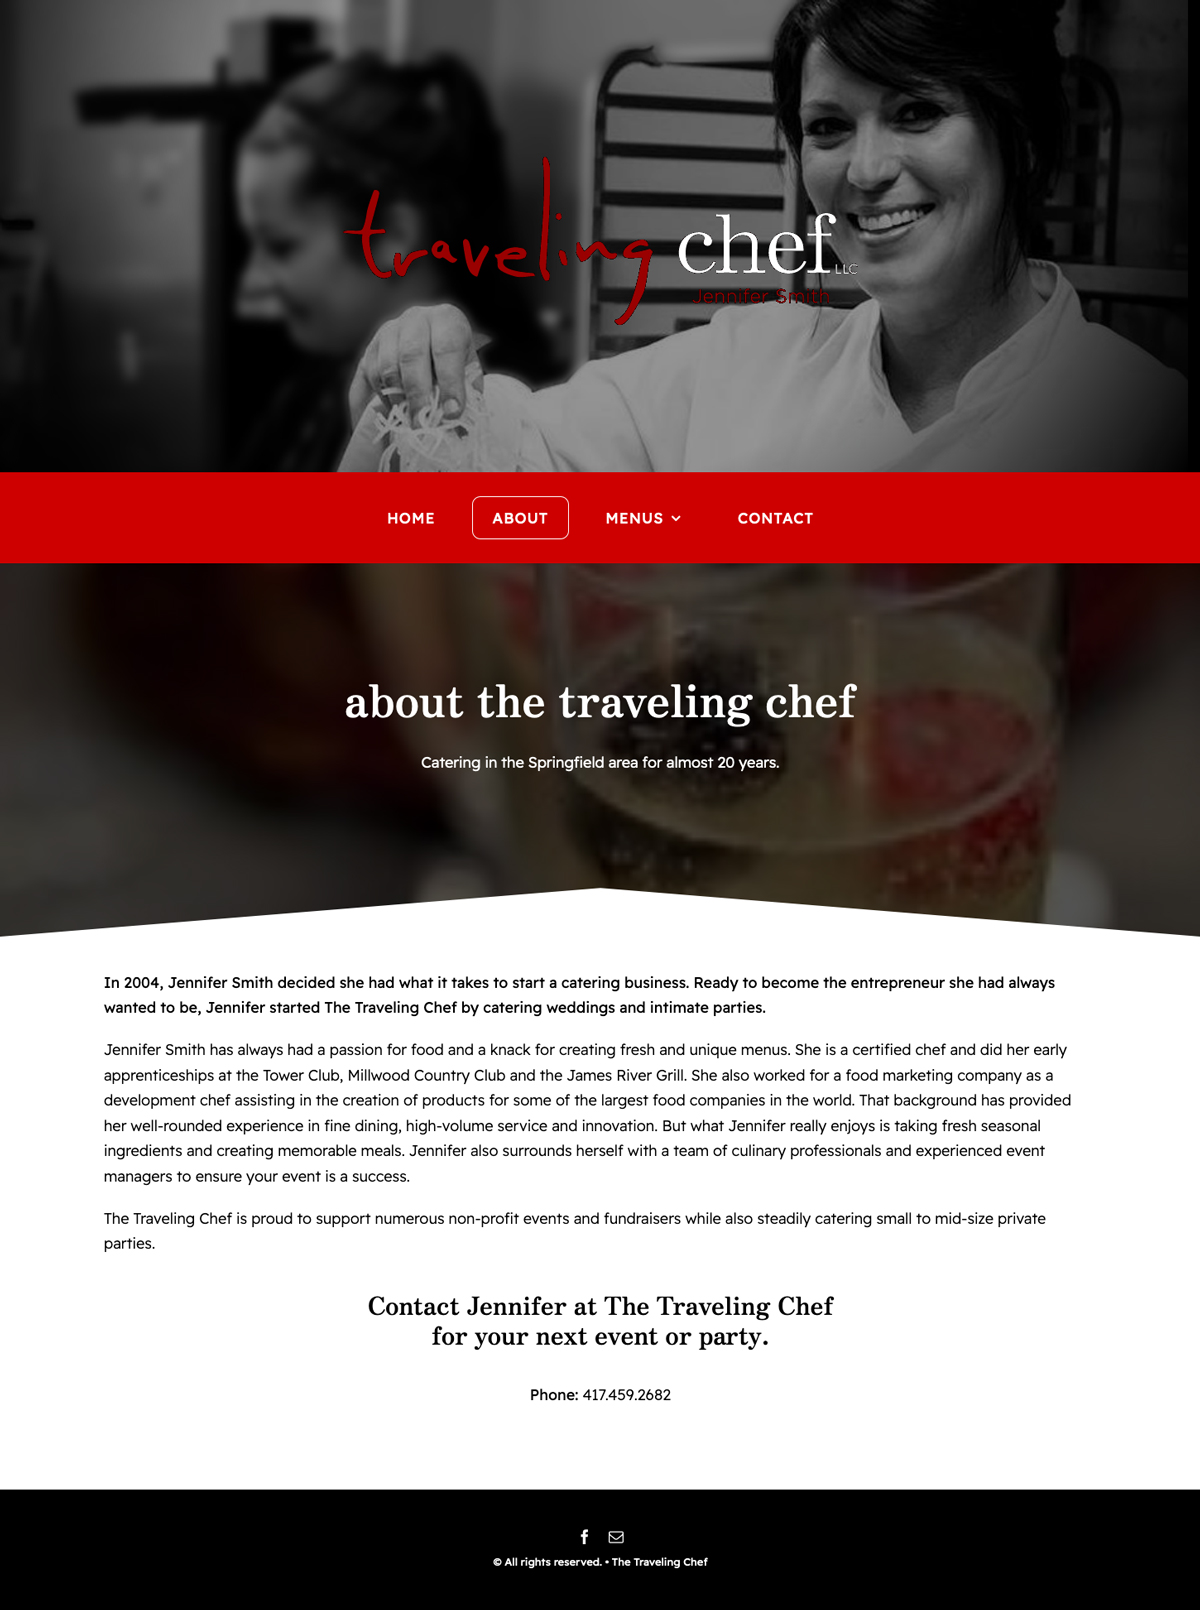 Website Design for The Traveling Chef Catering and Personal Chef - About